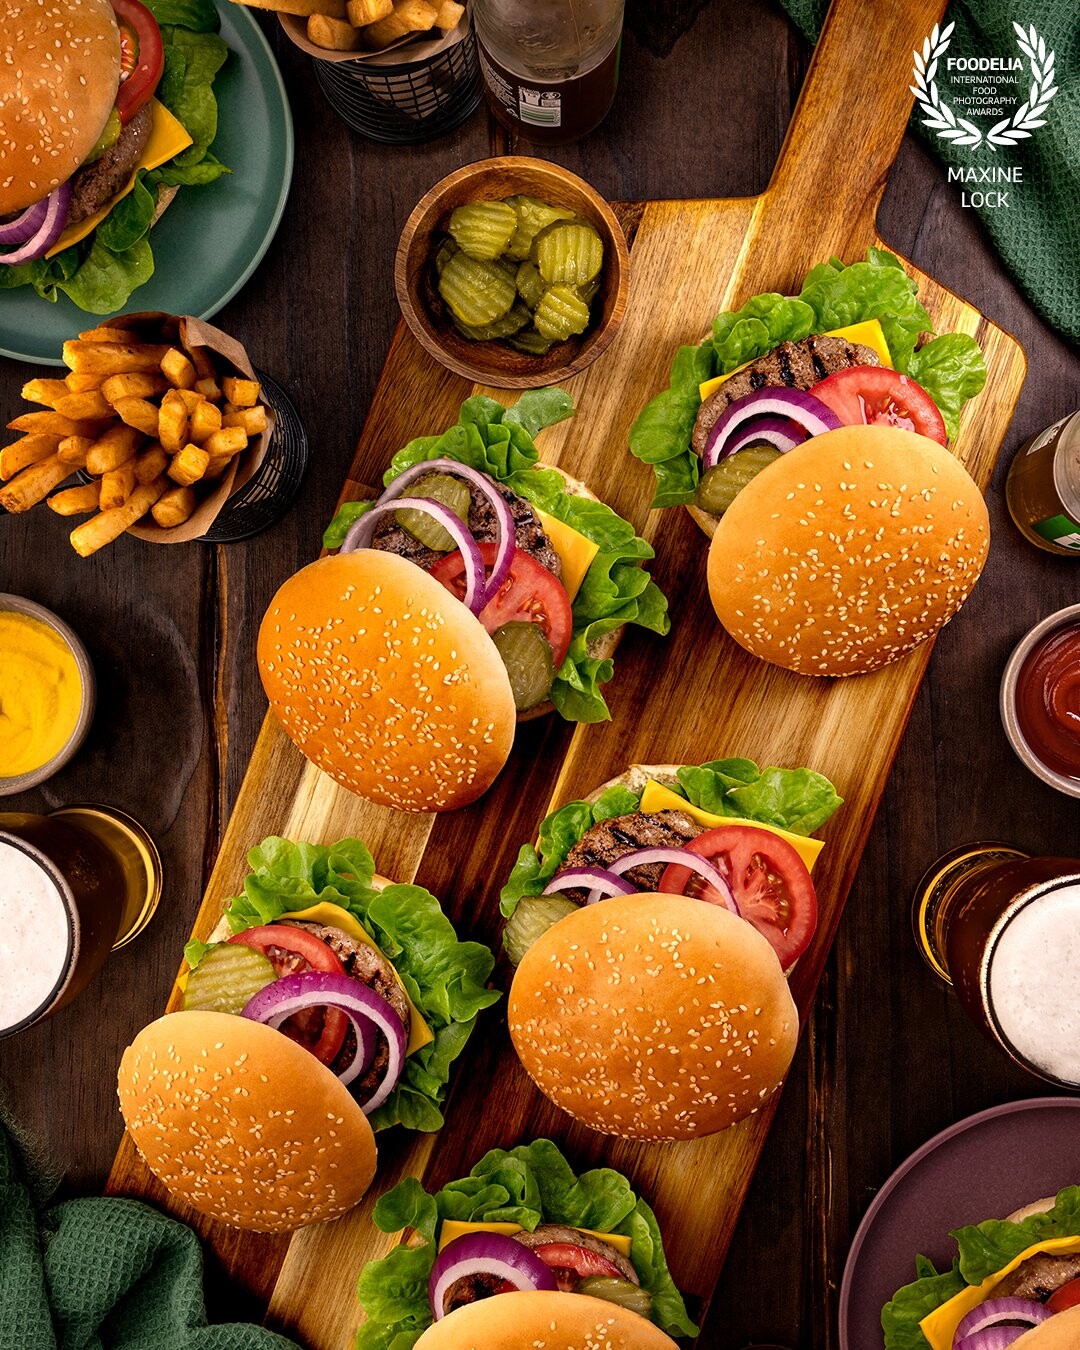 Multiple burgers on a wooden board, with the top bun slightly a skewed to show the inside fillings of the burgers. The table itself is surrounded by plates of burgers, fries, sauces and beer glasses and bottles.